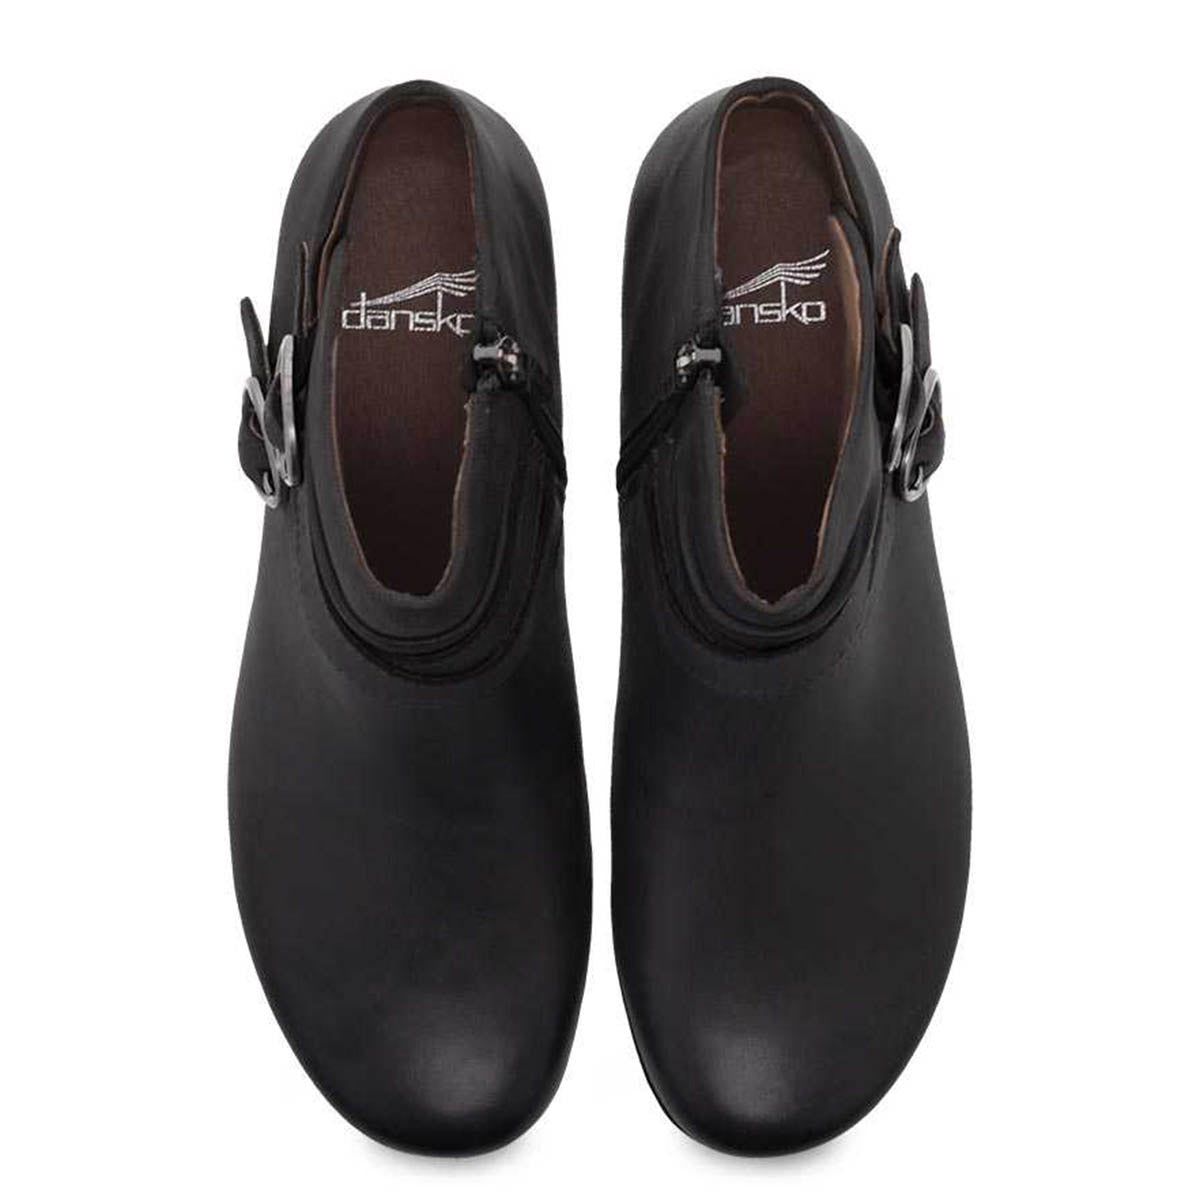 A pair of black Dansko Faithe Black Burnished Nubuck - Womens clogs viewed from above, featuring the Dansko Natural Arch technology and showing the upper part with the brand name inside.